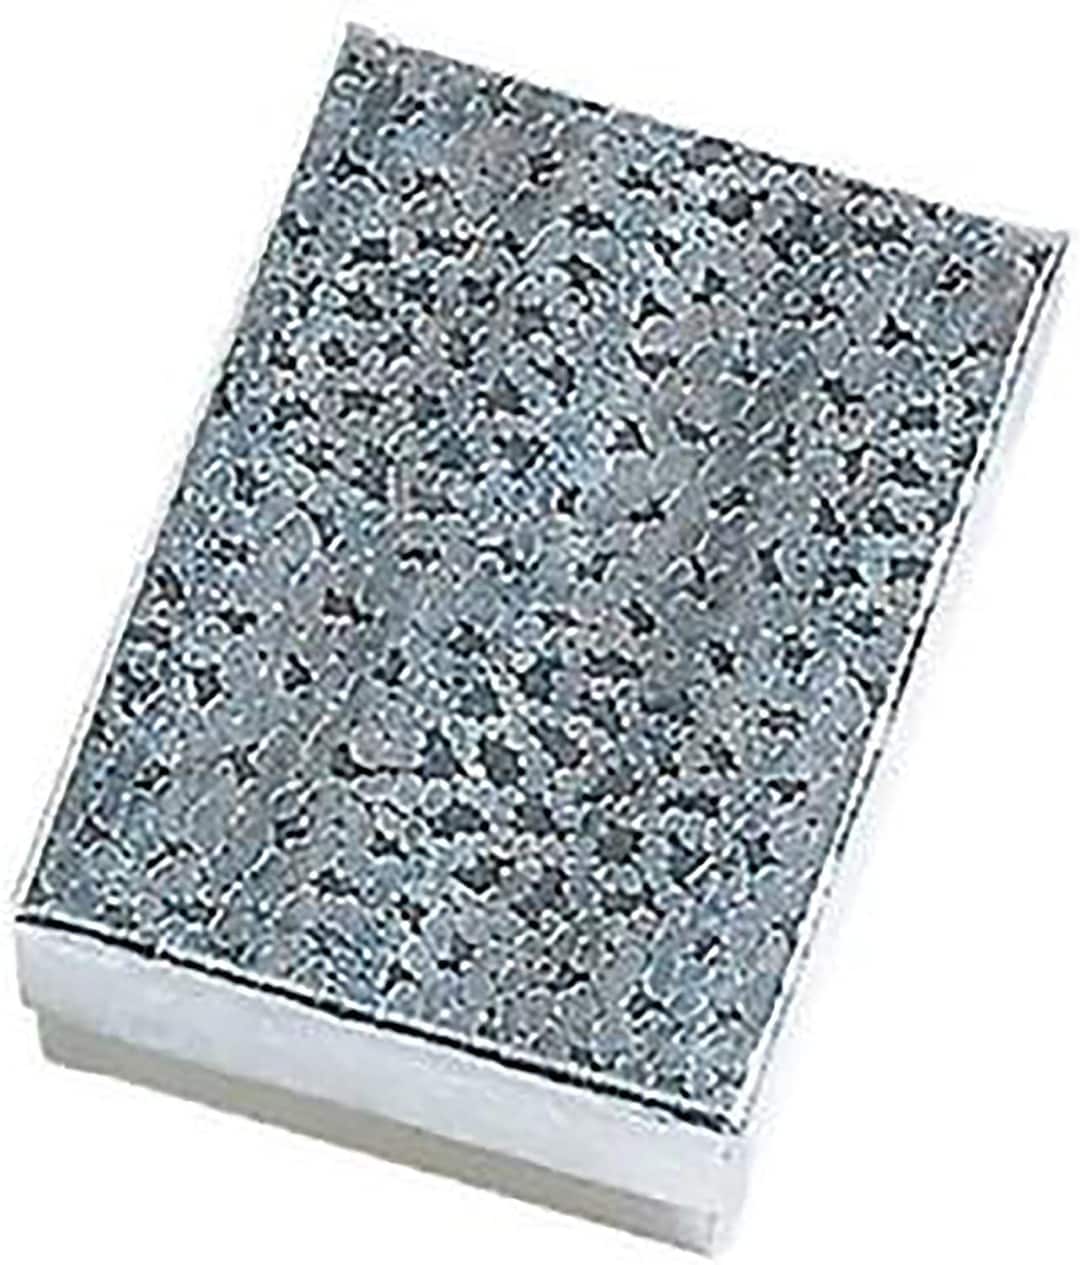 Novel Box 100 Pcs Silver Cotton Filled Jewelry Display Gift Etsy